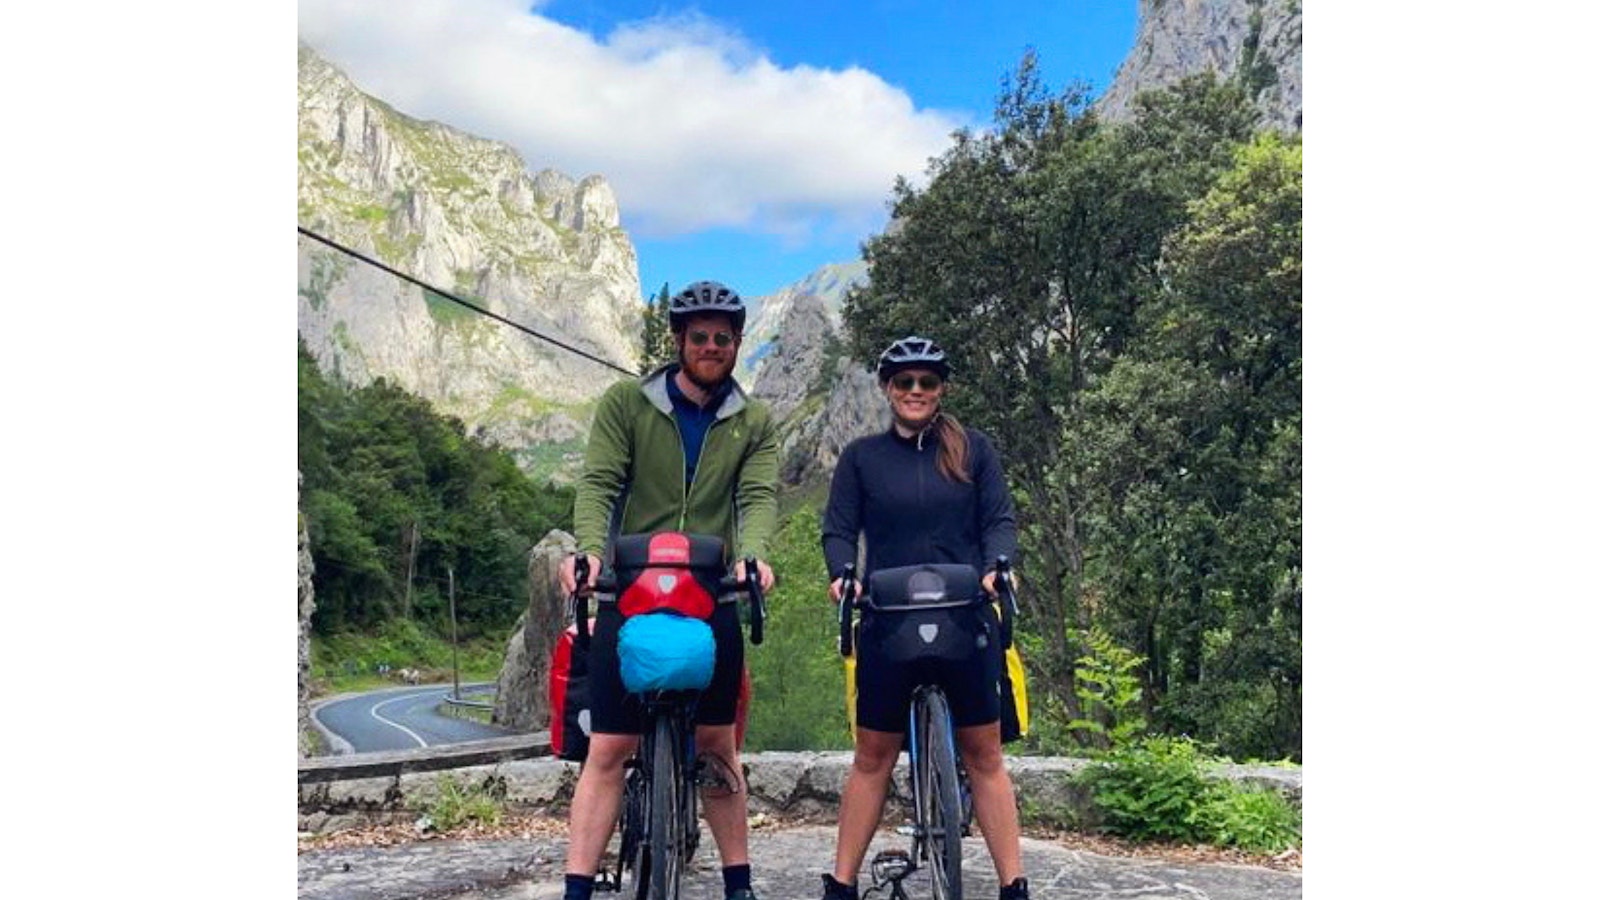 Ayesha and Aaron cycled an amazing 4388km across Europe to show their support for our work tackling the biodiversity and climate crises, raising over £1500 as they went!